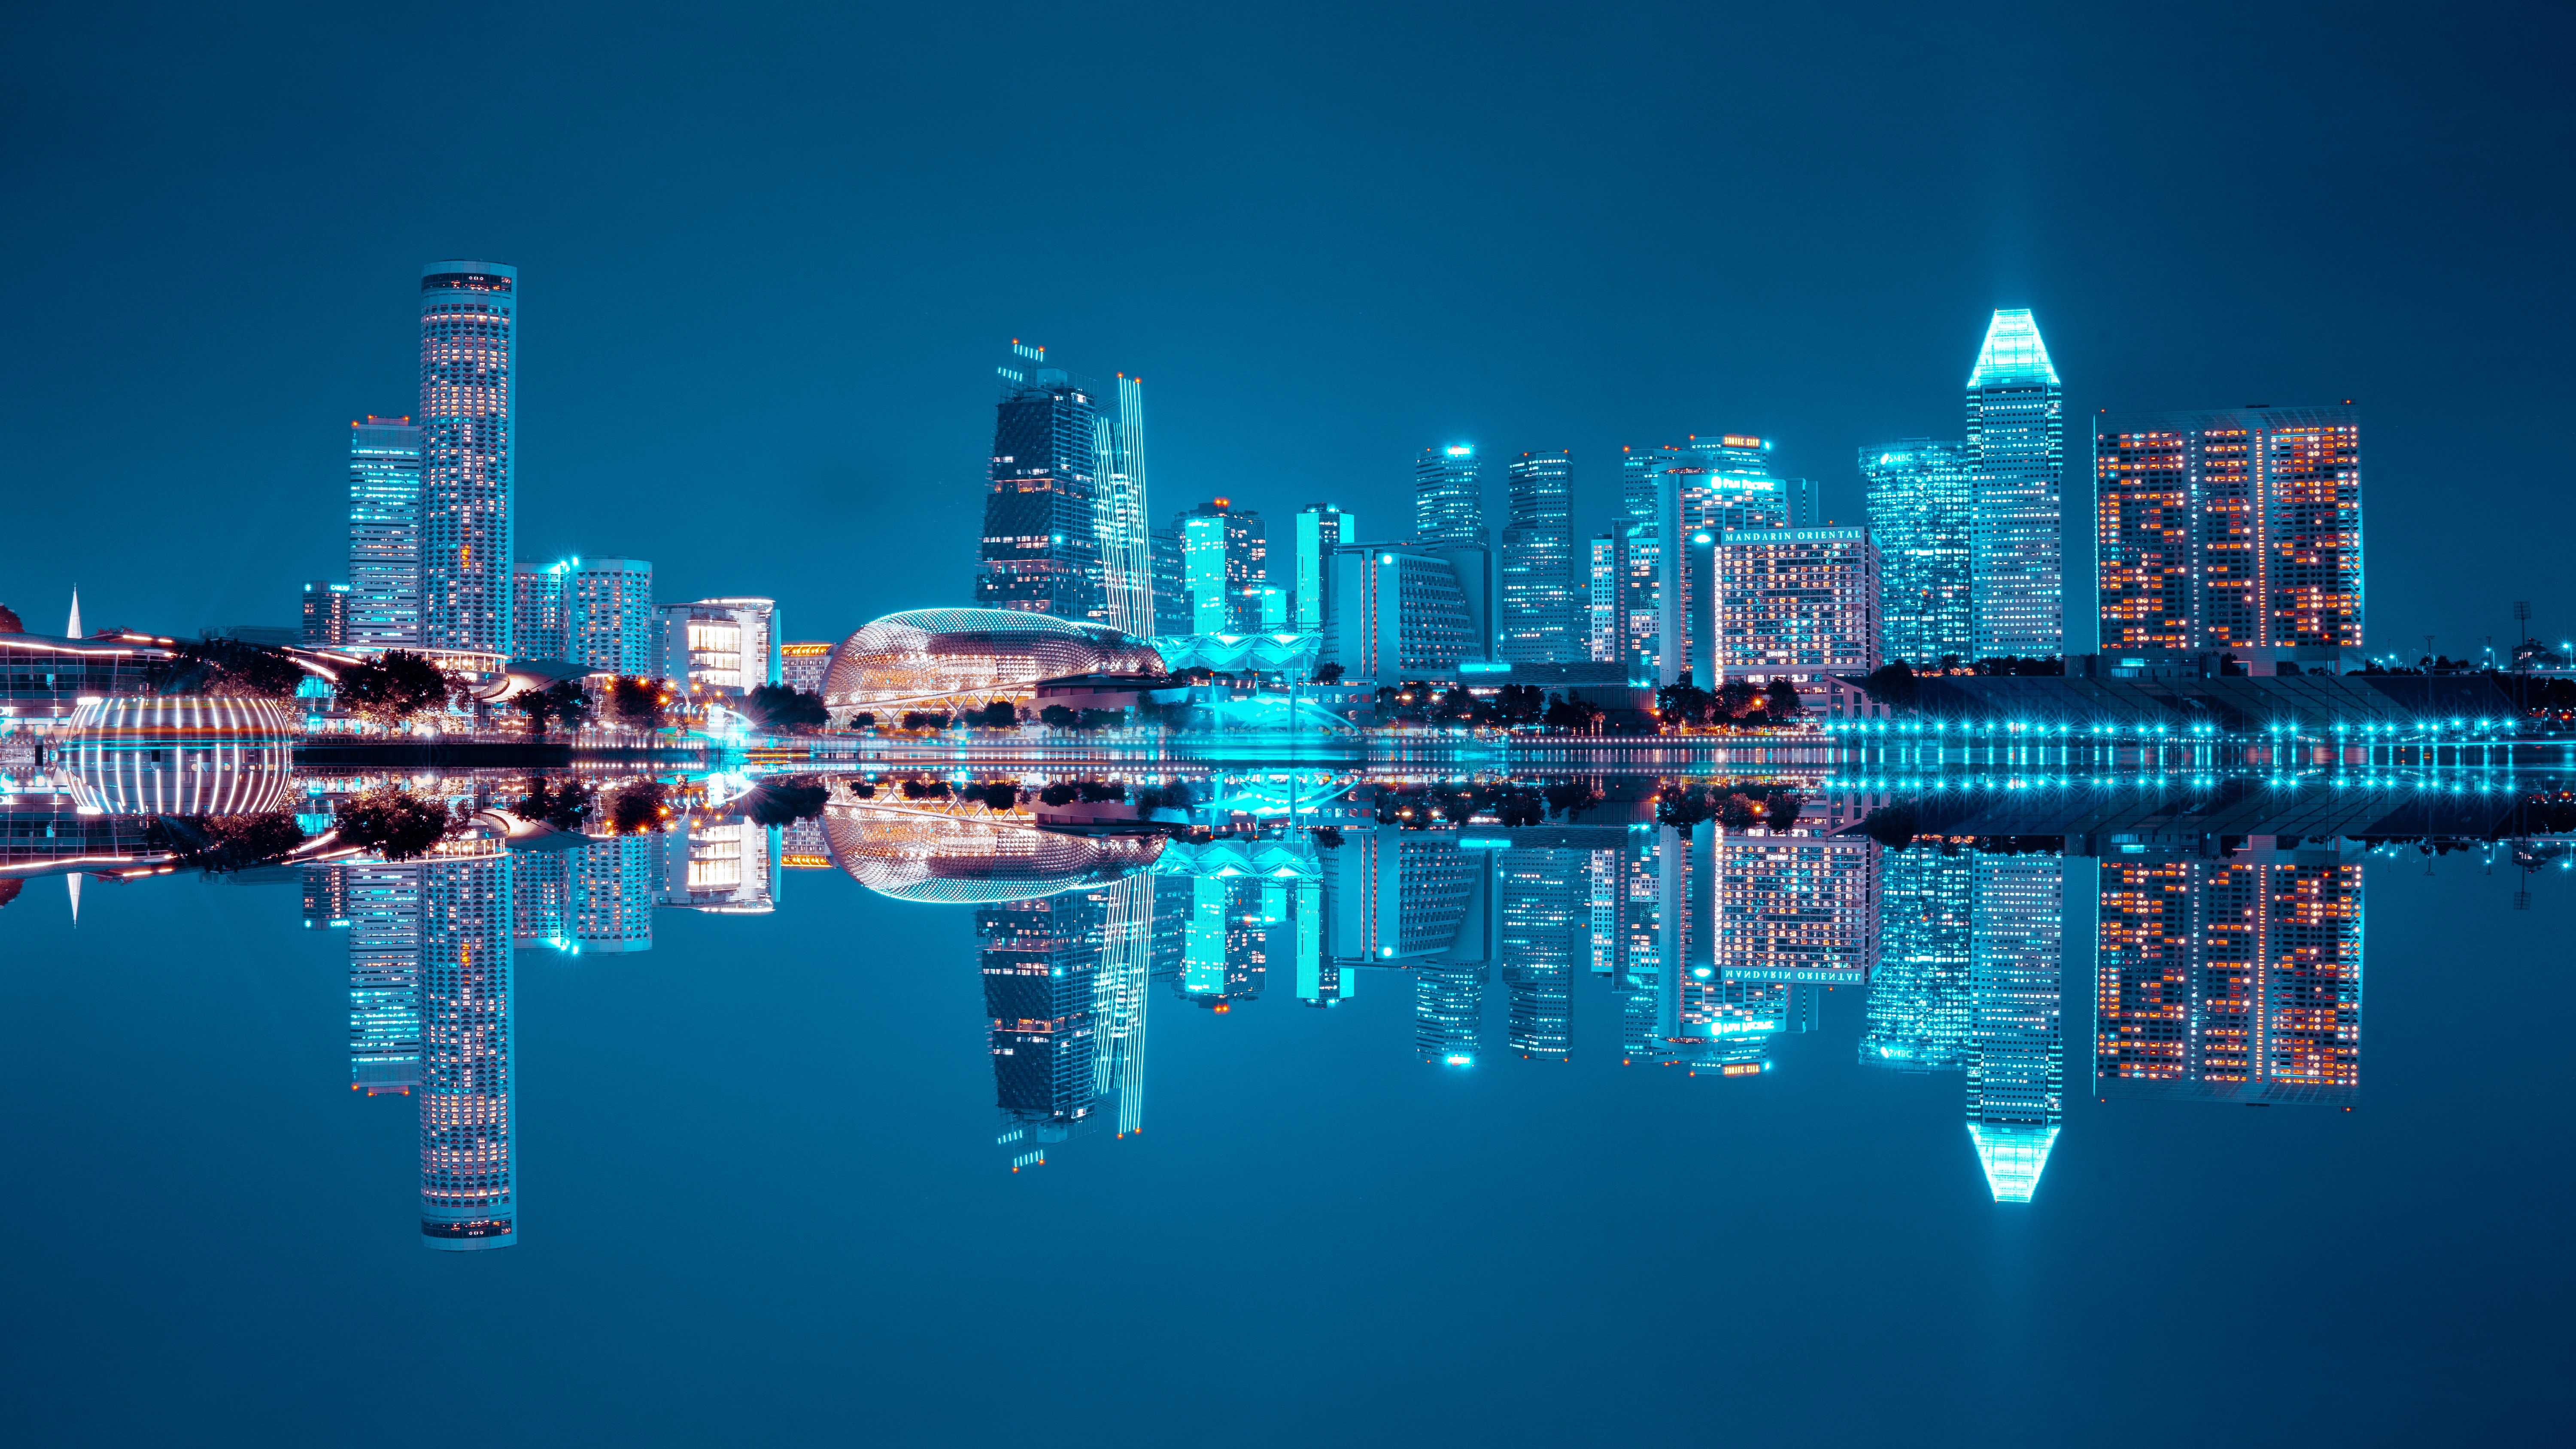 singapore, cityscape, night, building, man made, cities, reflection